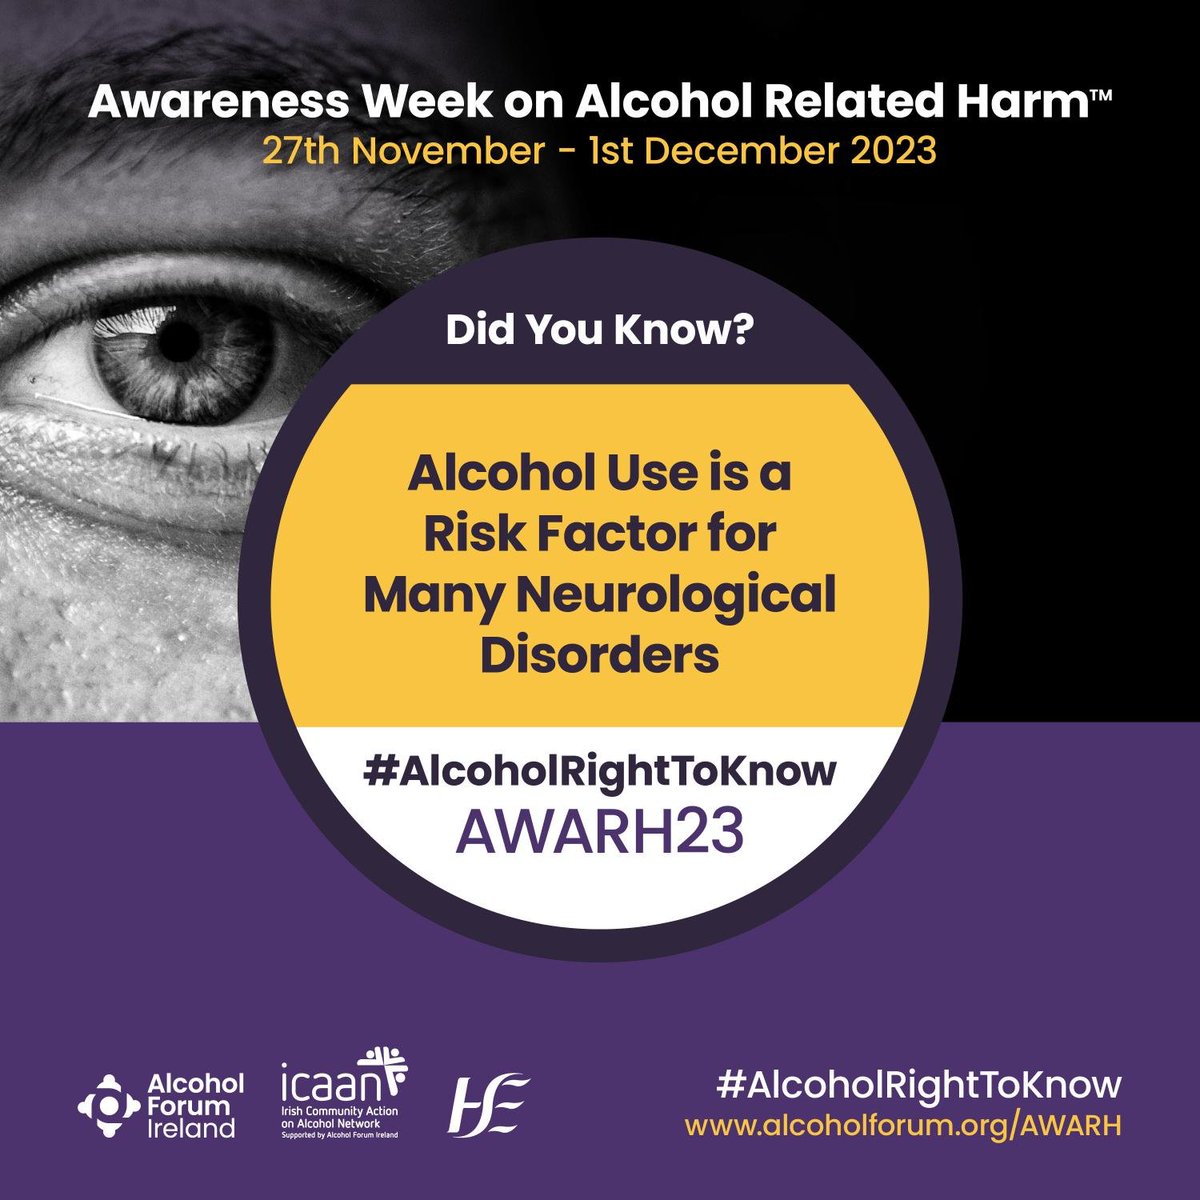 DAY 2 Alcohol is a neurotoxin – it can cause damage to your brain & nervous system & plays a significant role in the onset & course of many neurological disorders including epilepsy, dementia, and alcohol related brain injury.